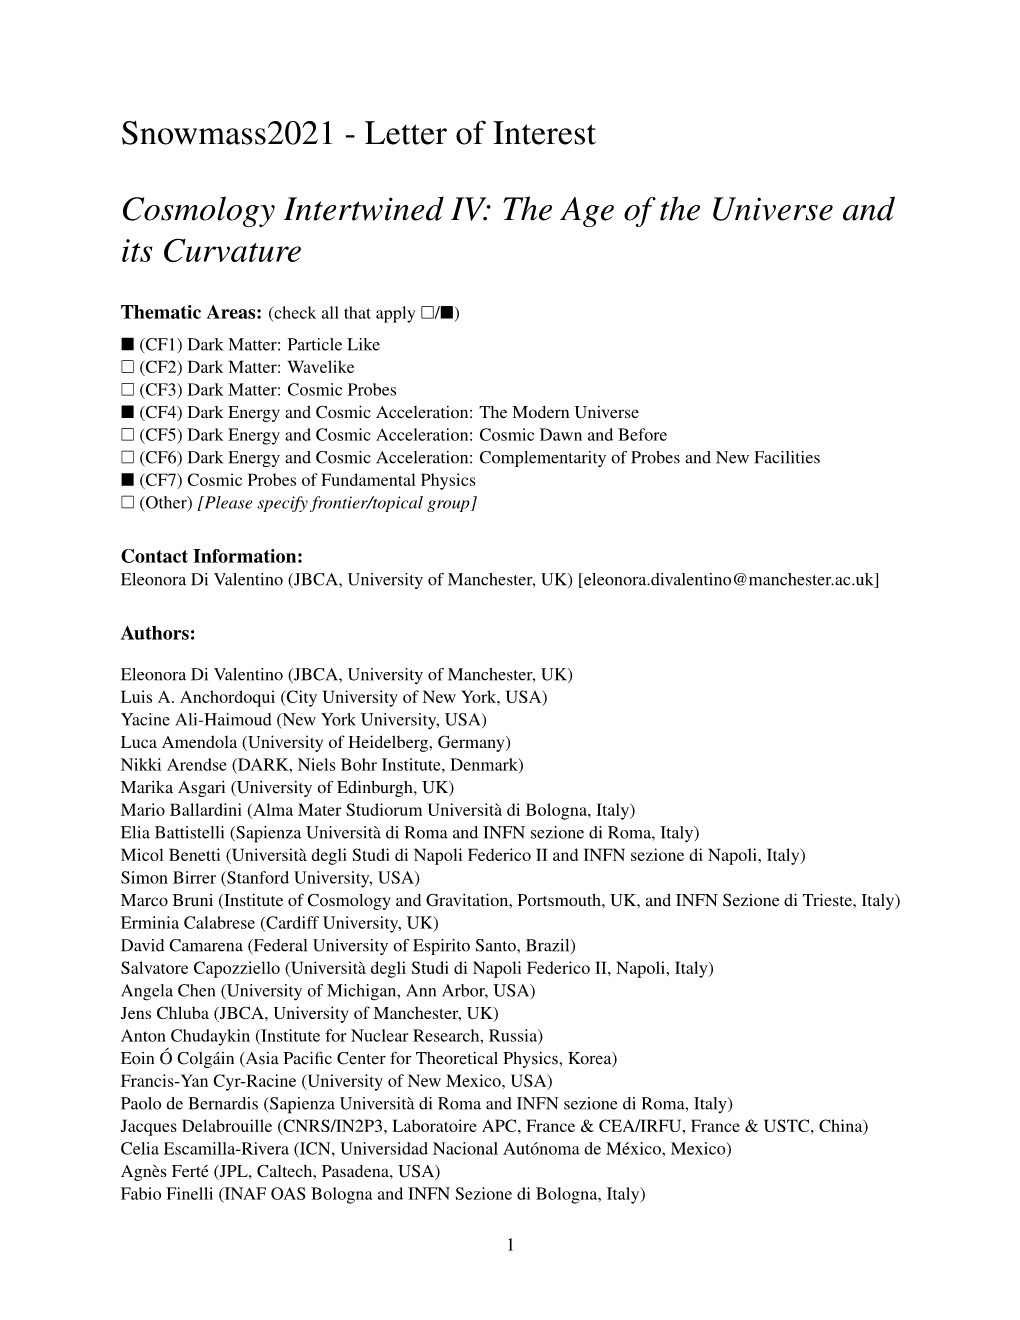 Letter of Interest Cosmology Intertwined IV: the Age